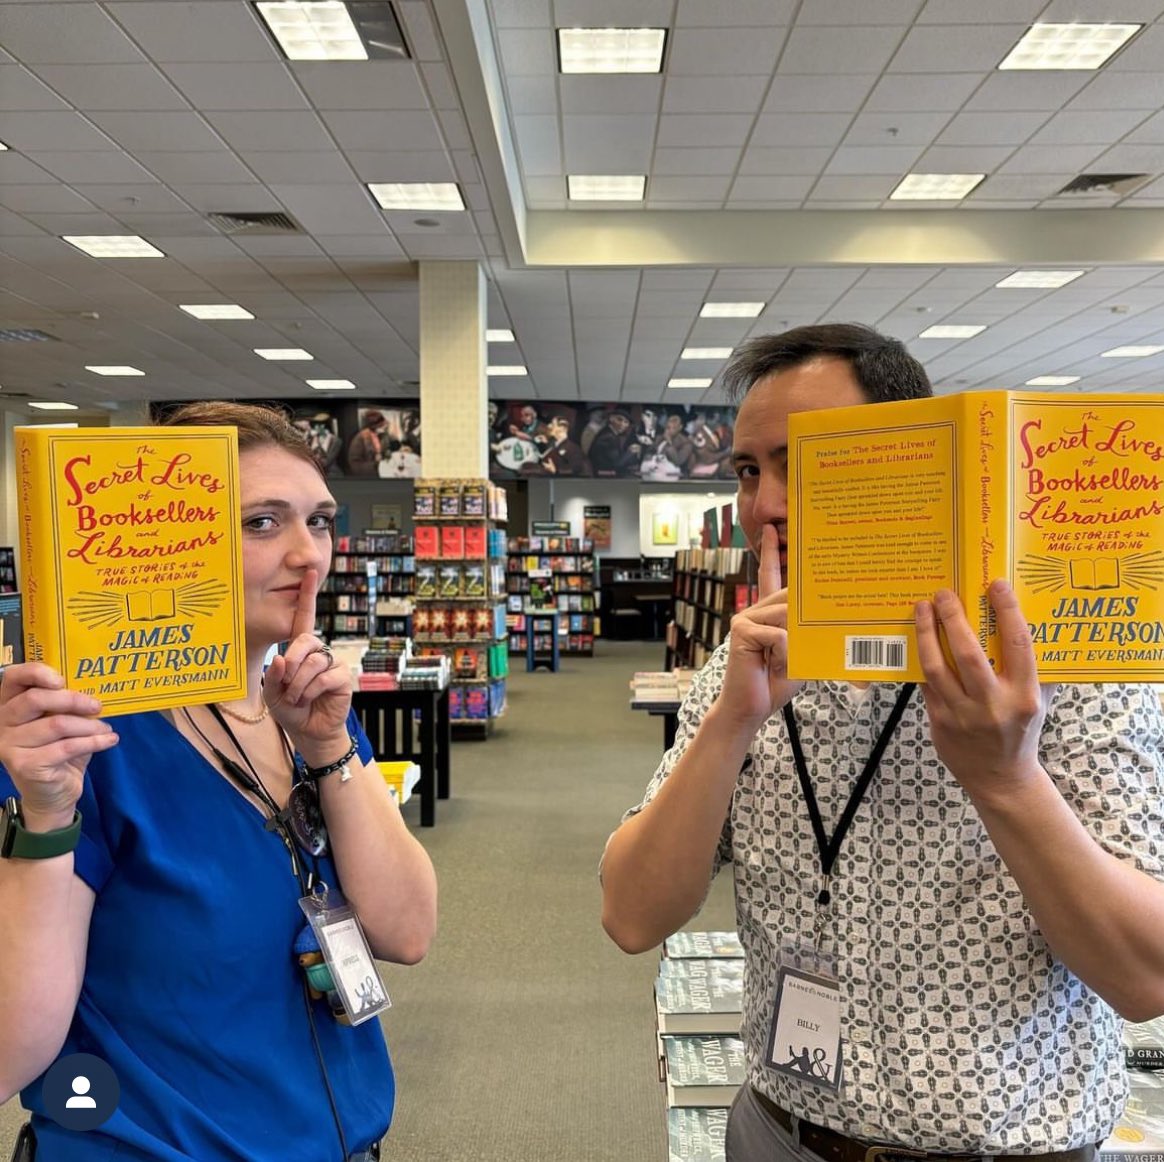 Ever wondered what your bookseller is really thinking? James Patterson and Matt Eversmann’s newest release The Secret Lives of Booksellers and Librarians is here to answer all your questions📚

#bnfrederick #jamesatterson #newrelease #bnbookbuzz #booksellers #librarians